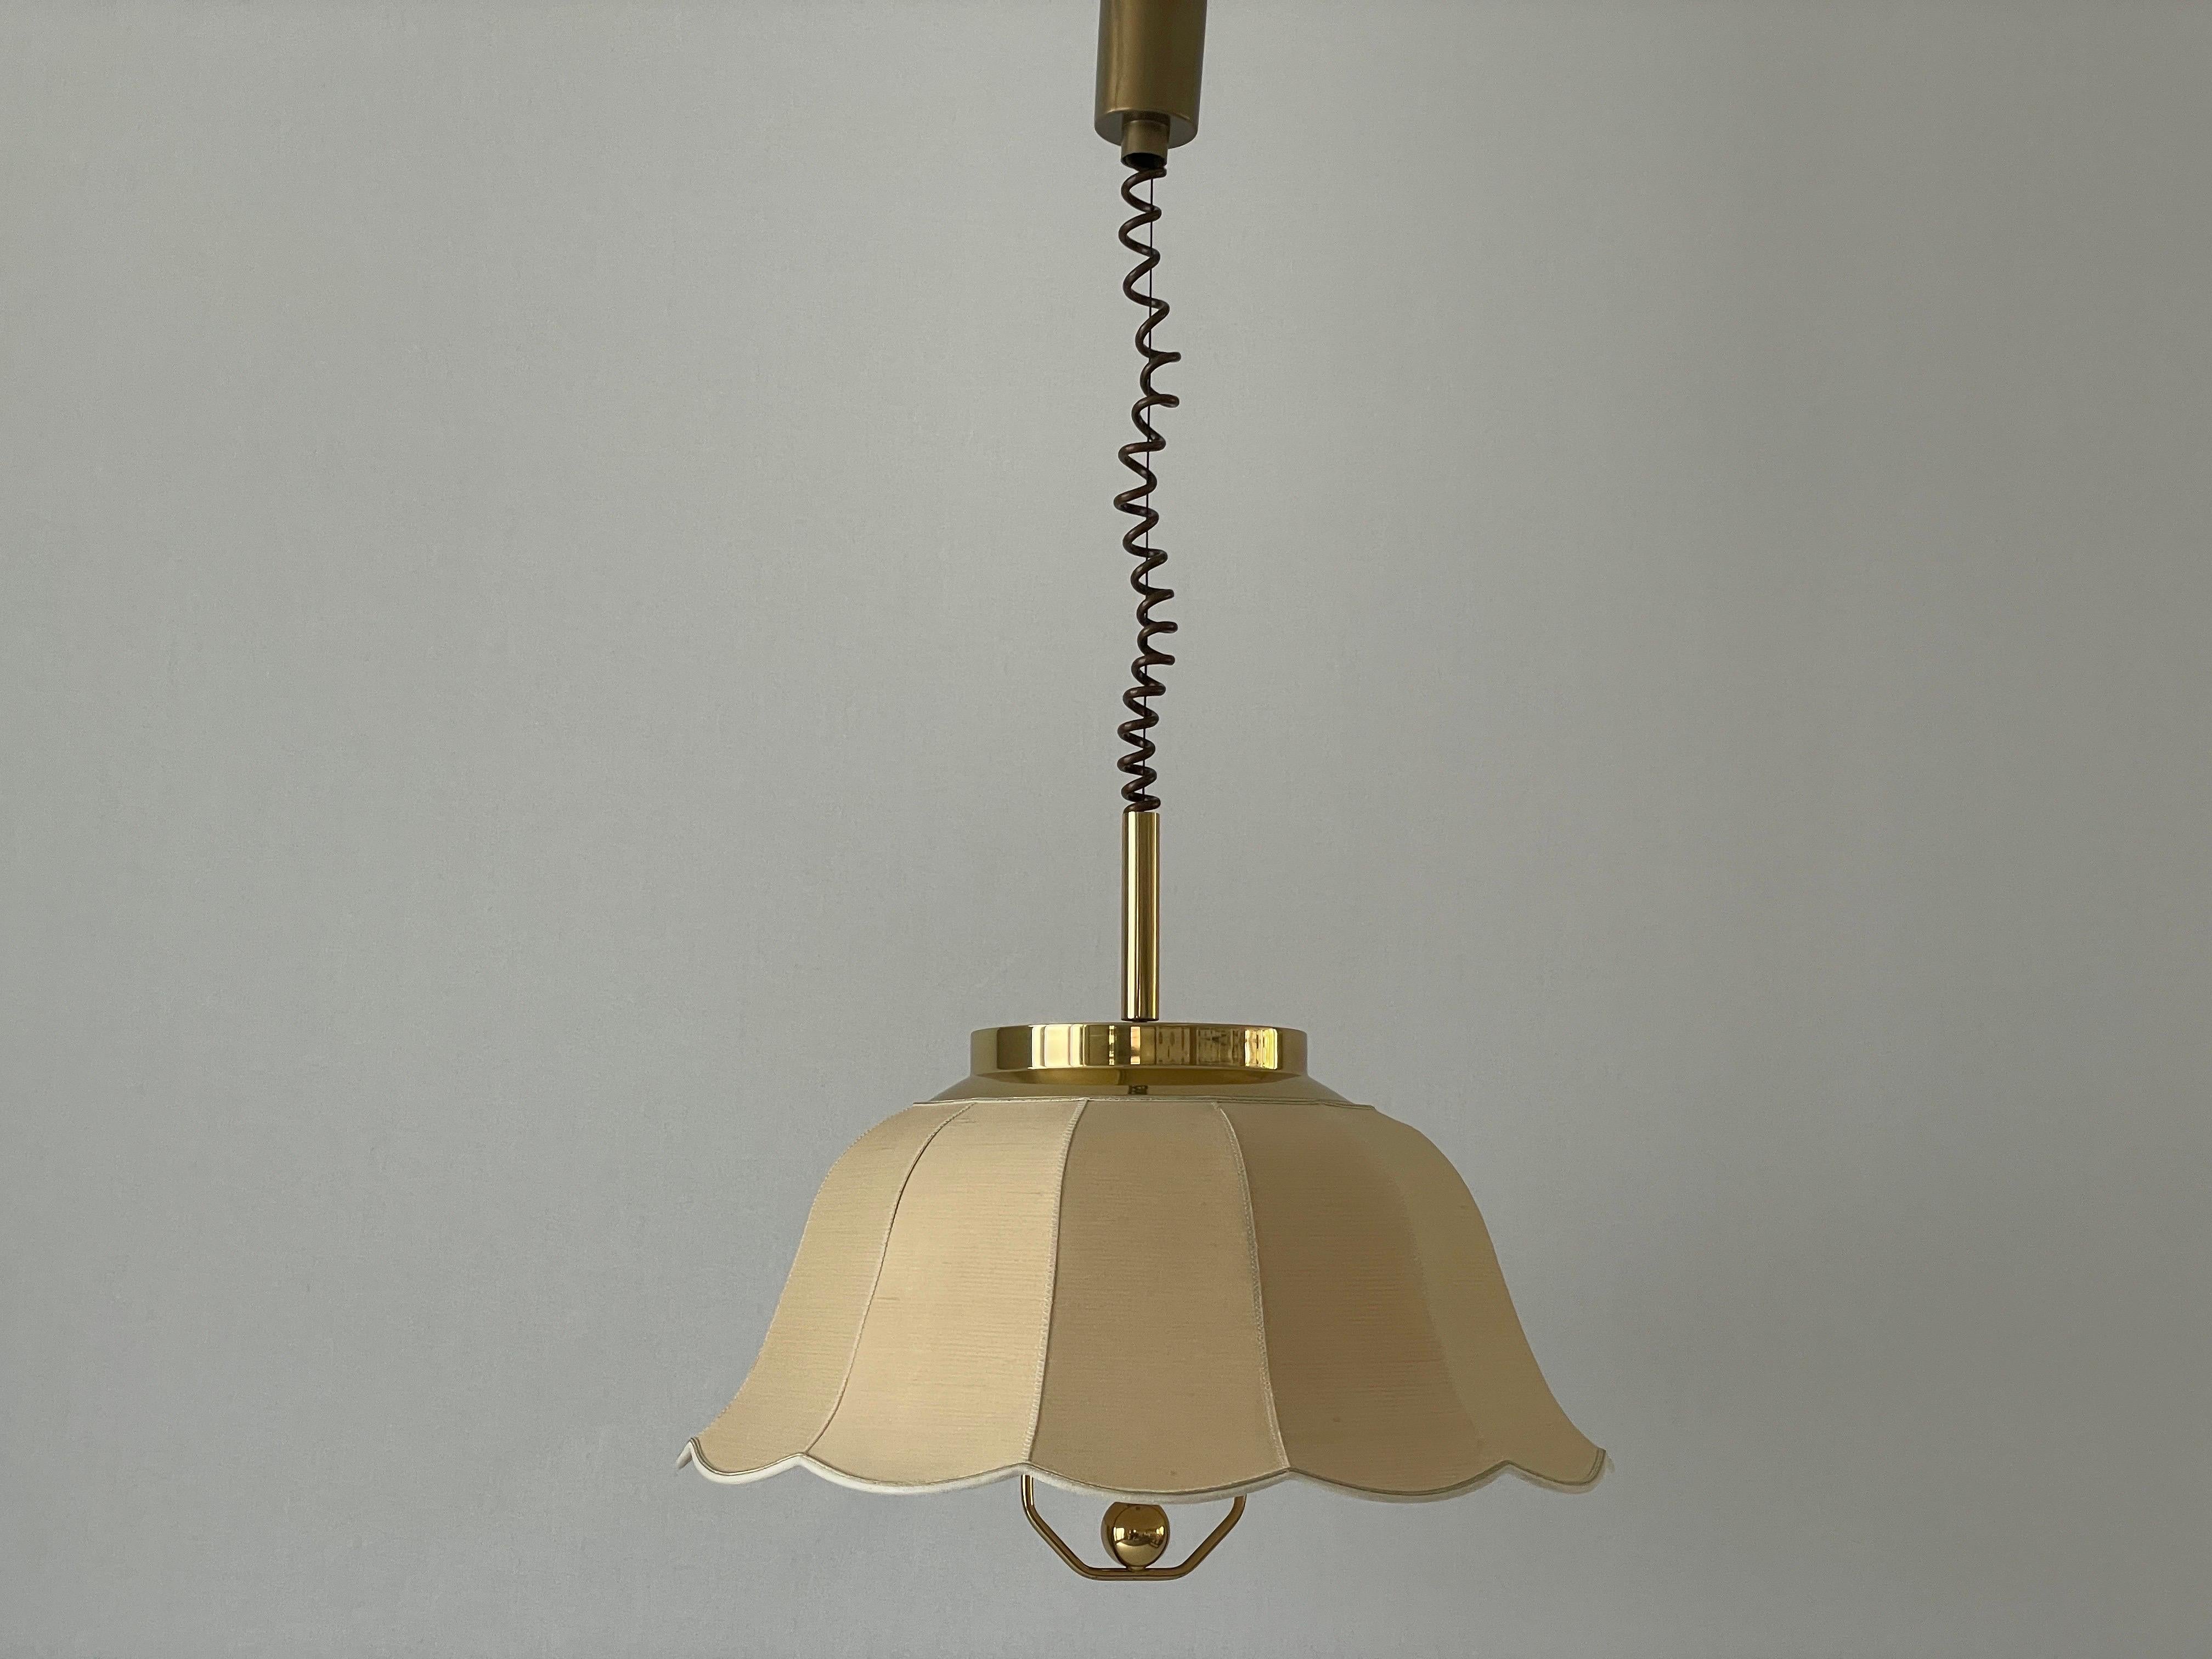 Fabric and Brass 5 socket Adjustable Shade Pendant Lamp by WKR, 1970s, Germany For Sale 2